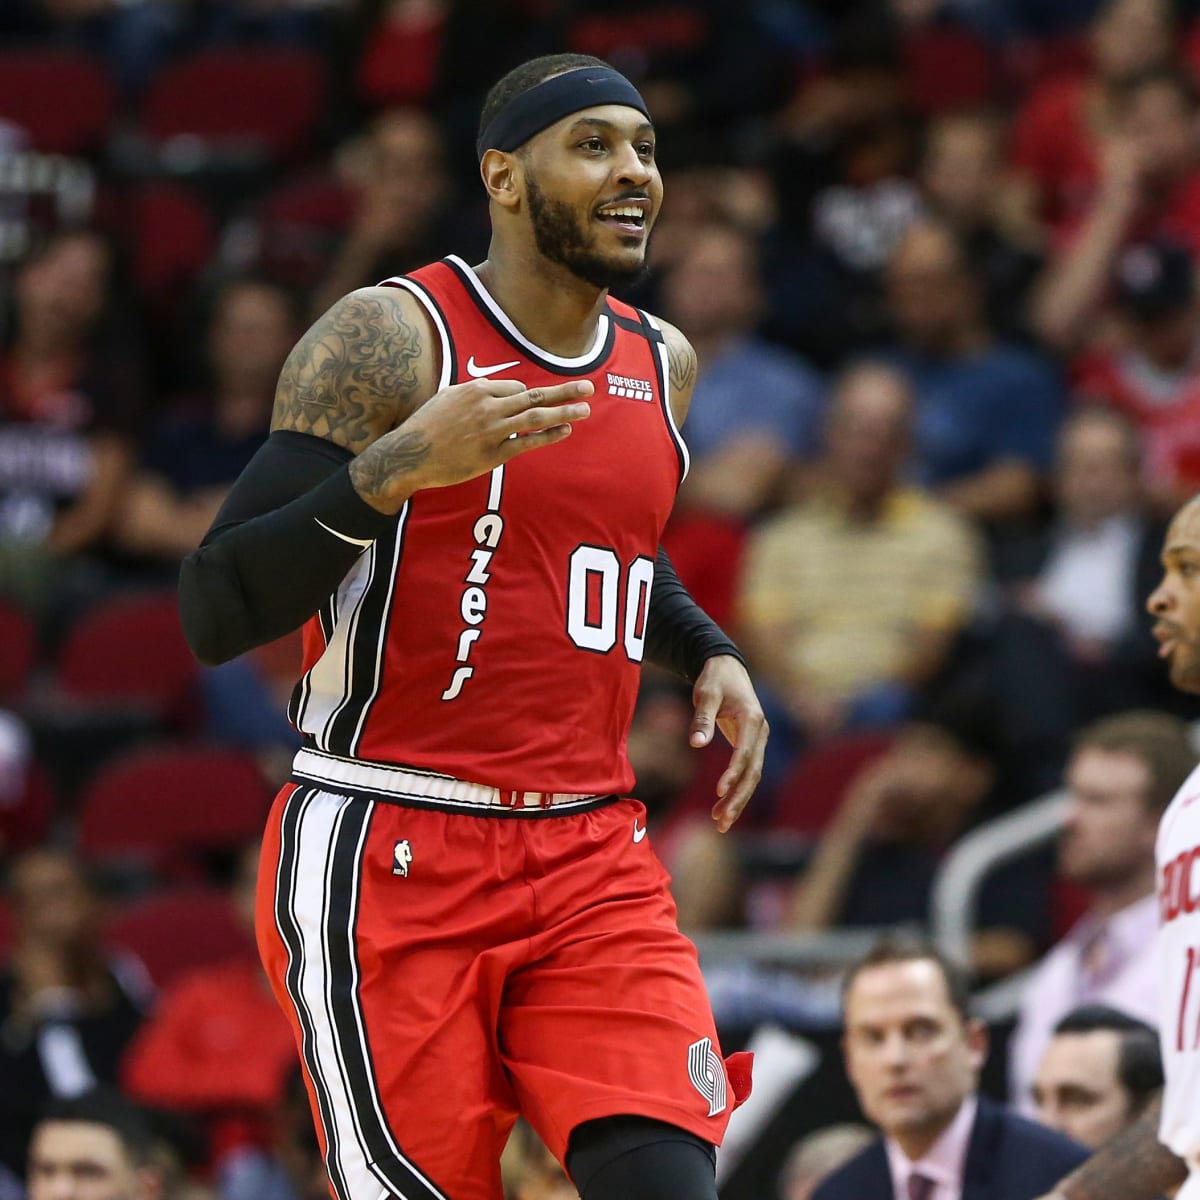 Carmelo Anthony: Rockets, 10-time NBA All-Star will part ways